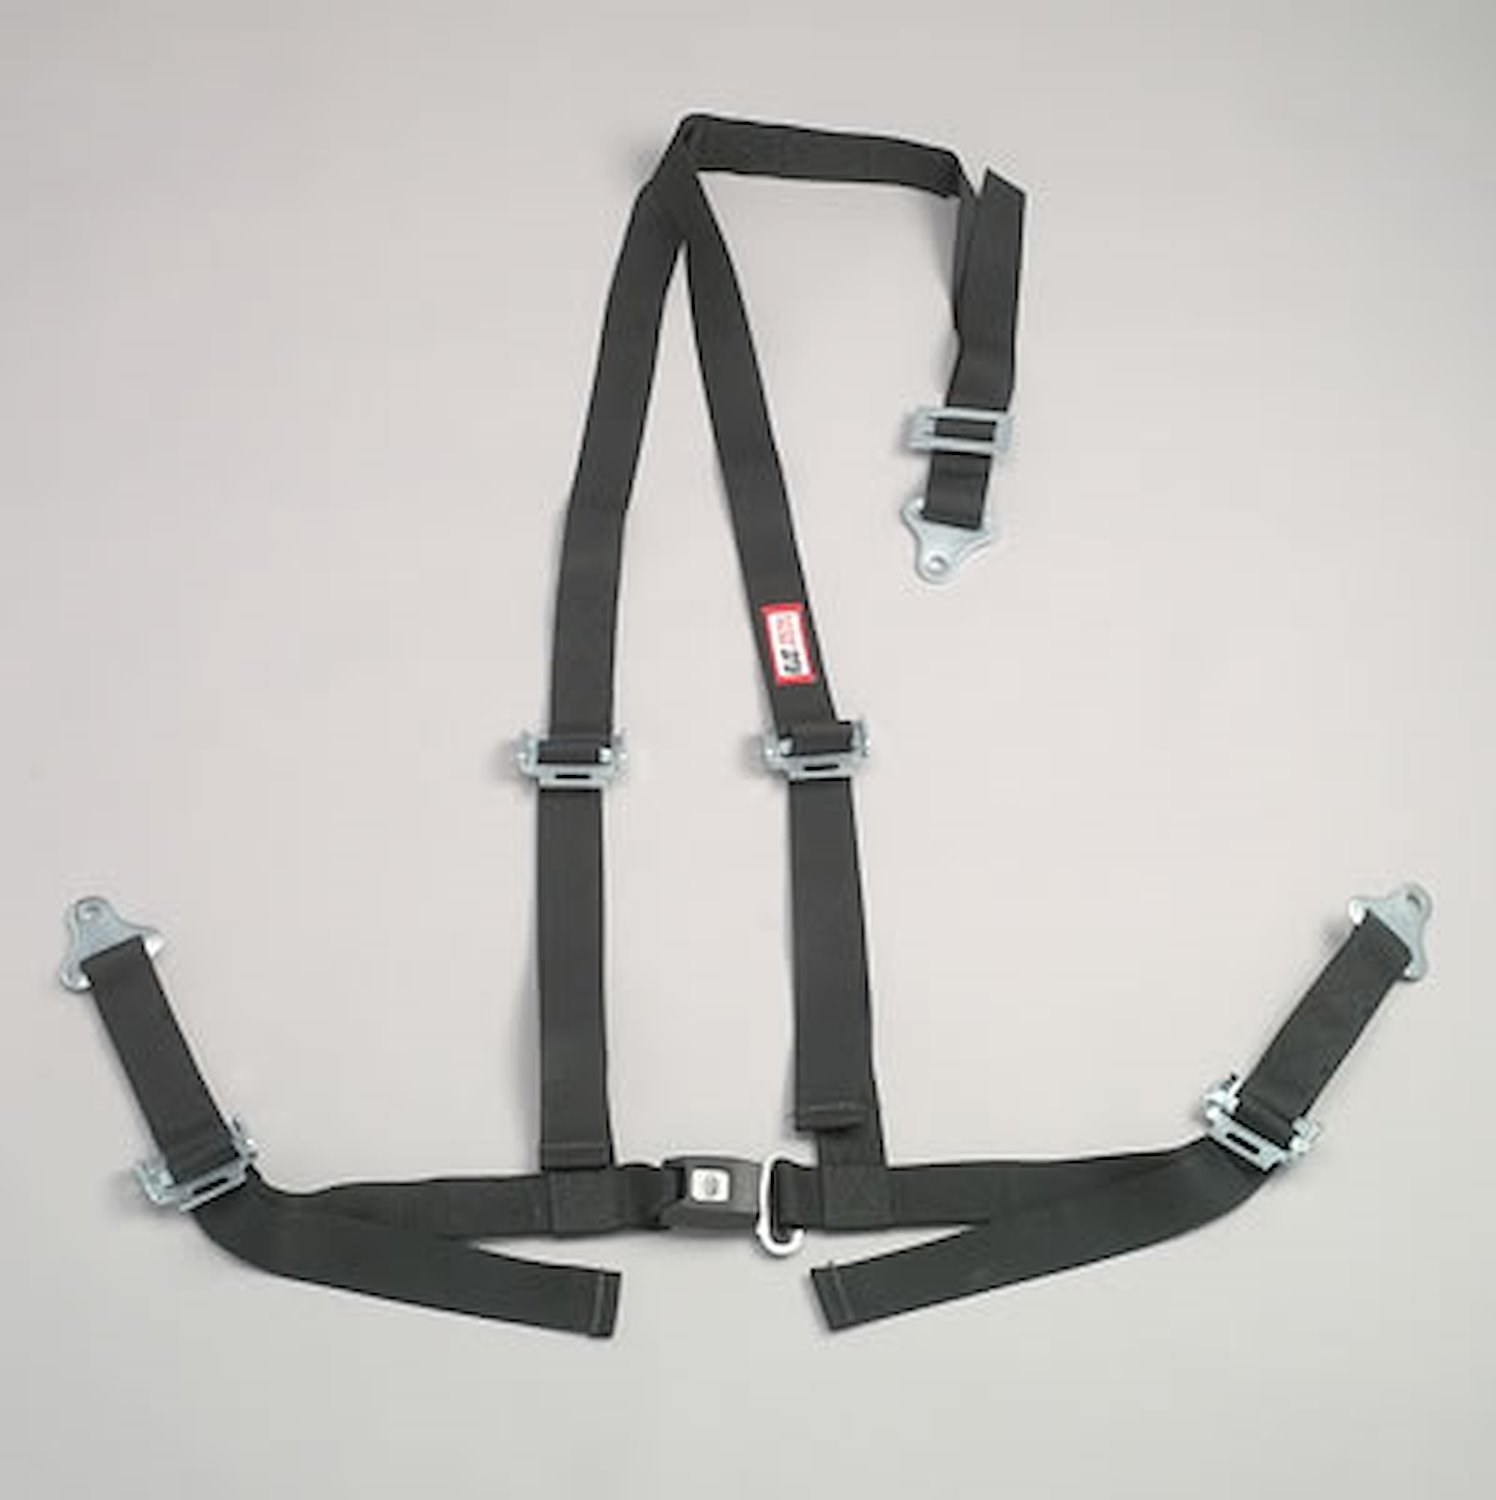 NON-SFI B&T HARNESS 2 PULL UP Lap Belt 2 S. H. Y FLOOR Mount ALL WRAP ENDS w/STERNUM STRAP YELLOW